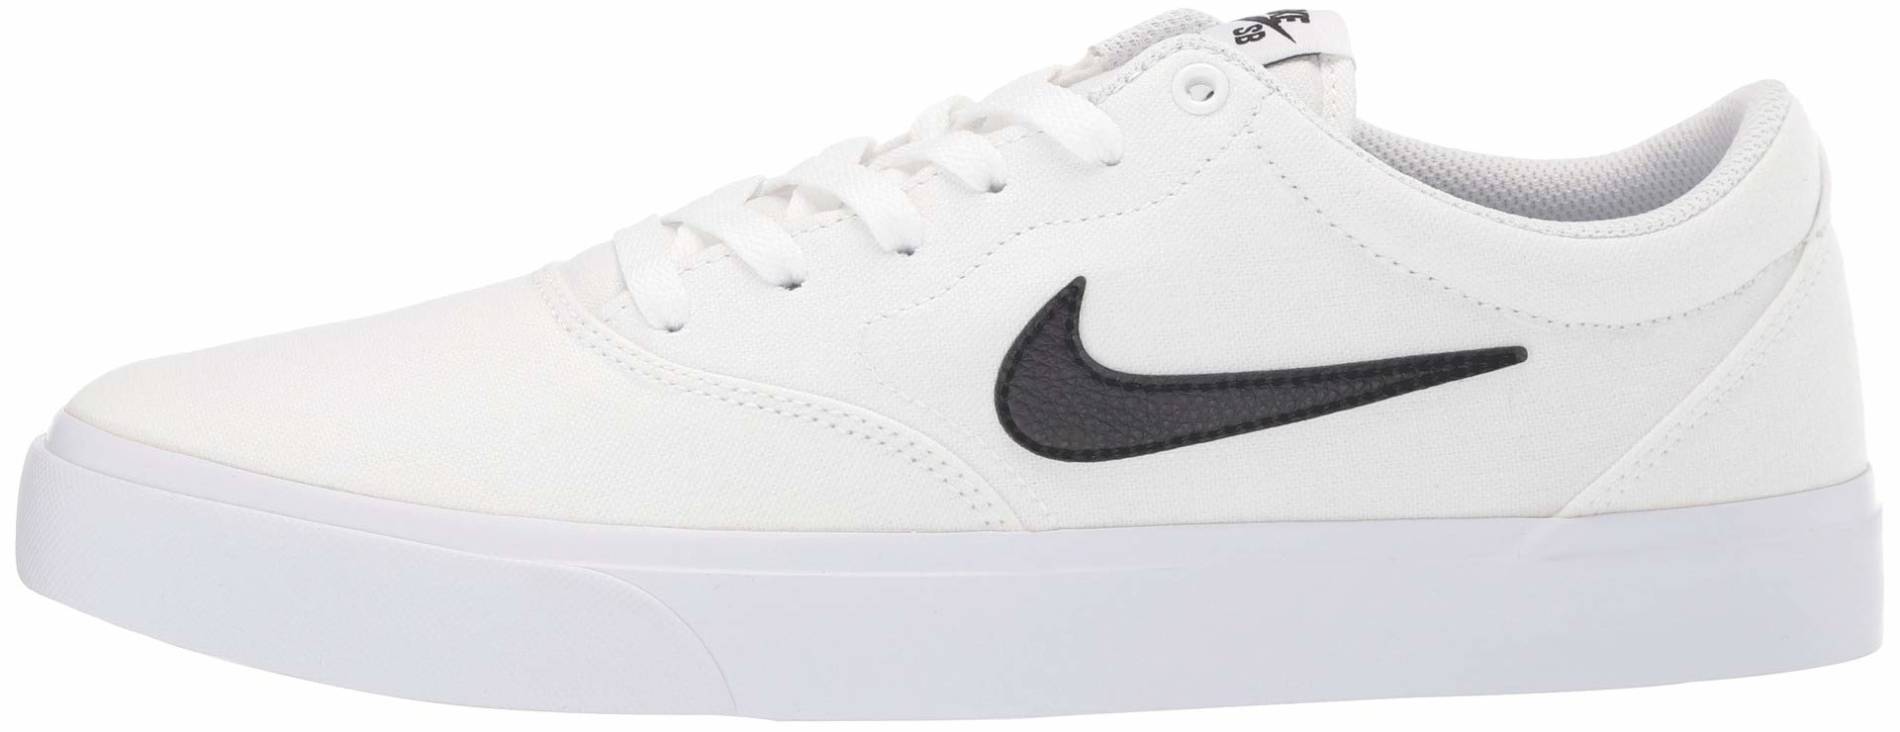 Nike SB Charge Canvas sneakers in 9 